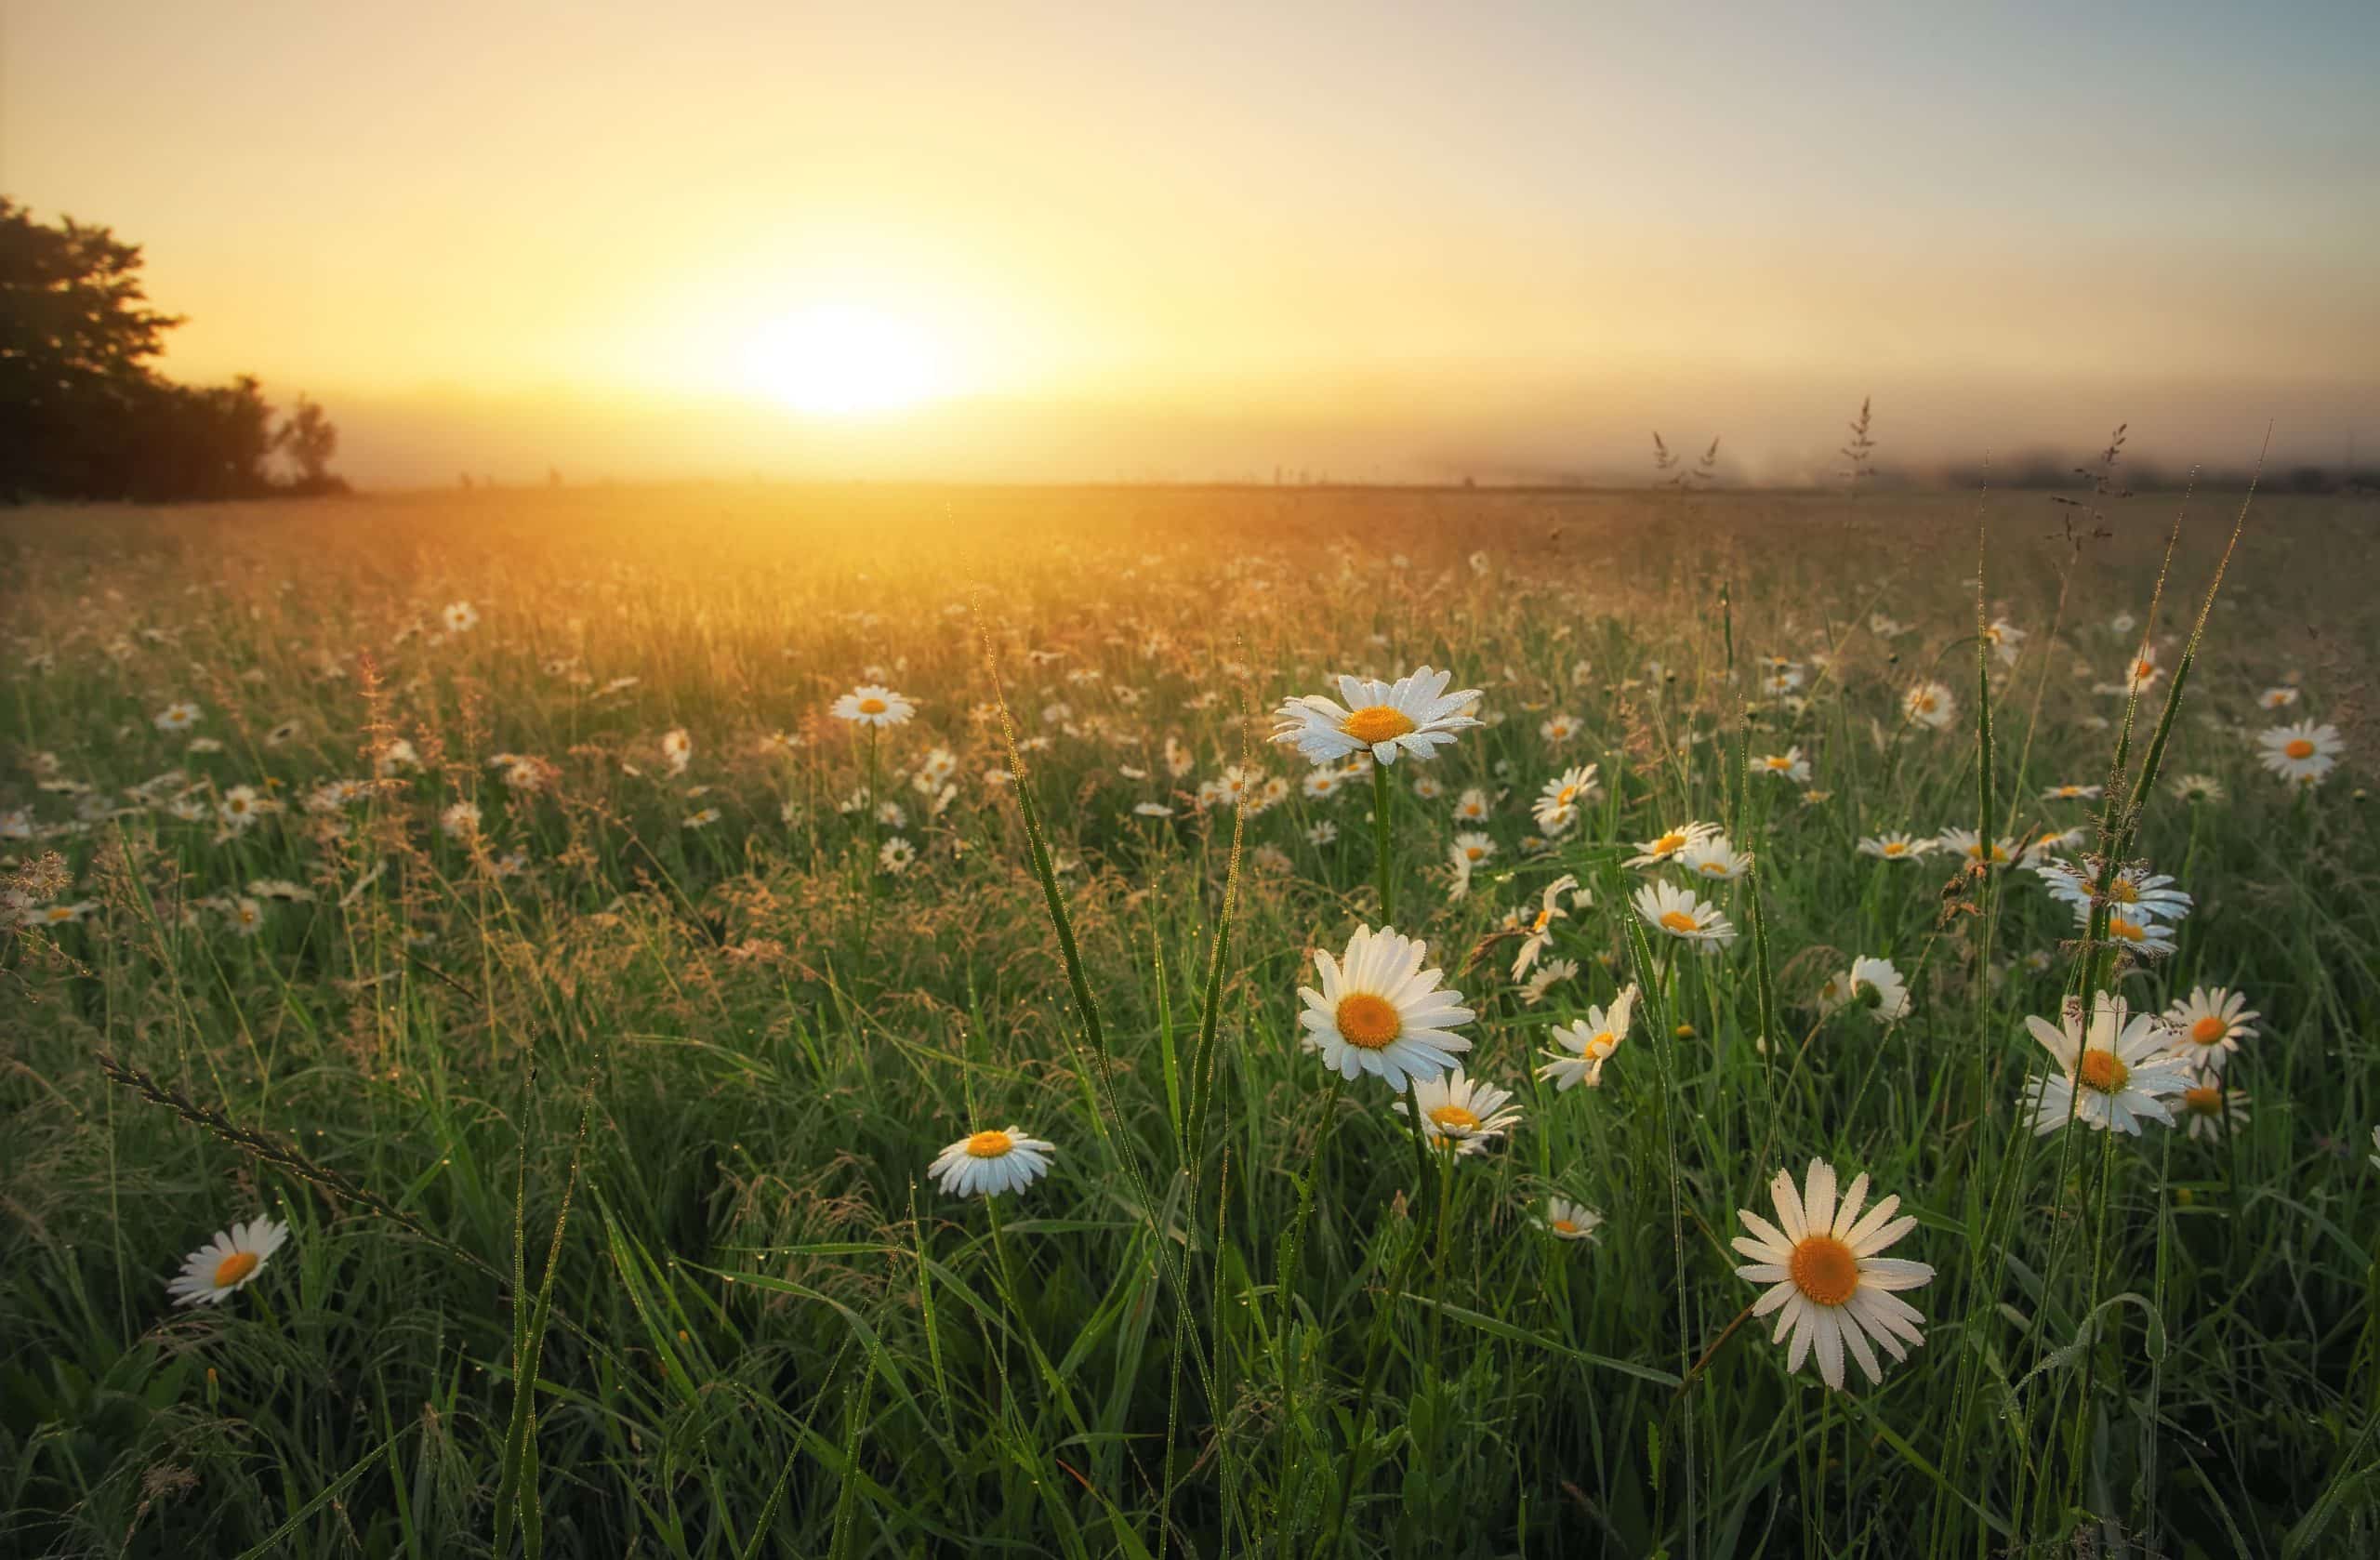 A sunset over a field of daisies